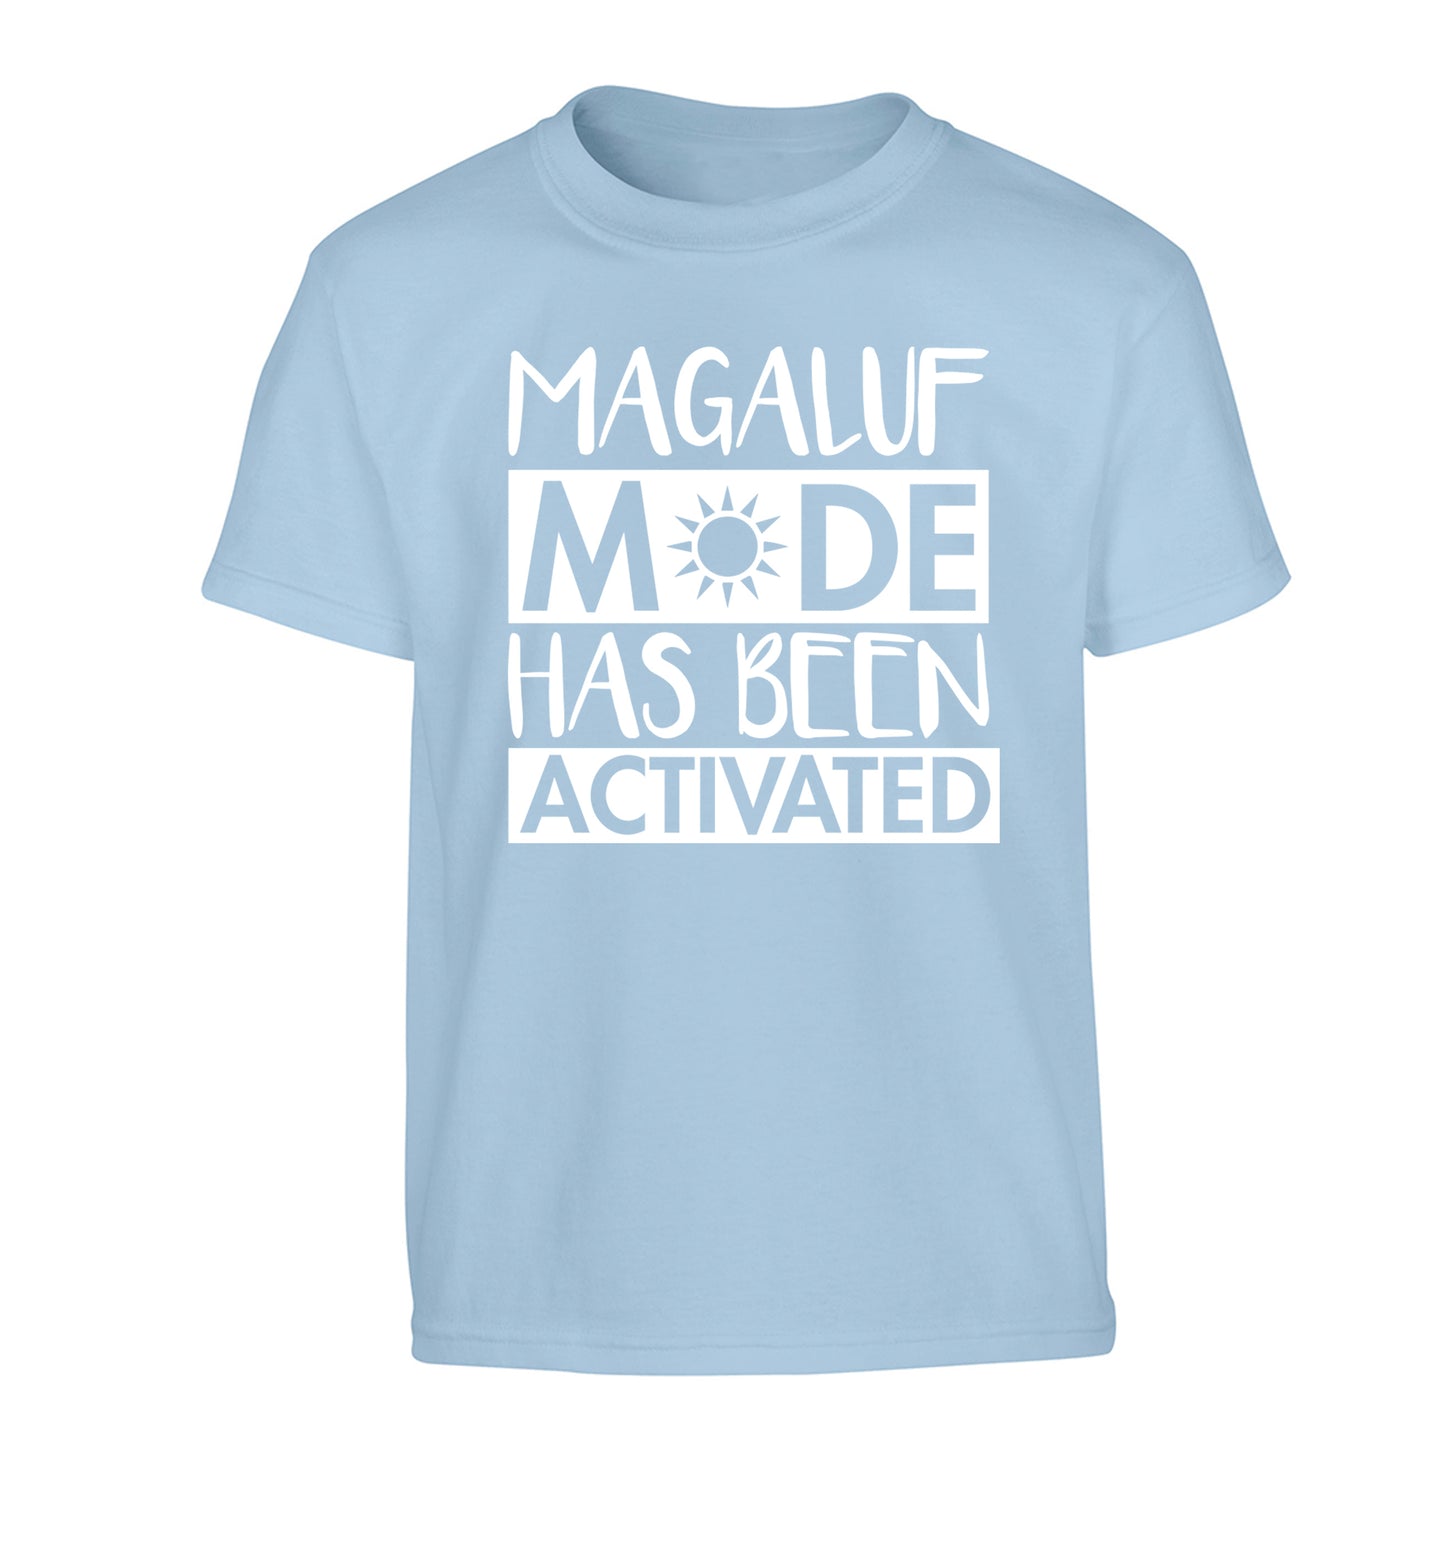 Magaluf mode has been activated Children's light blue Tshirt 12-13 Years